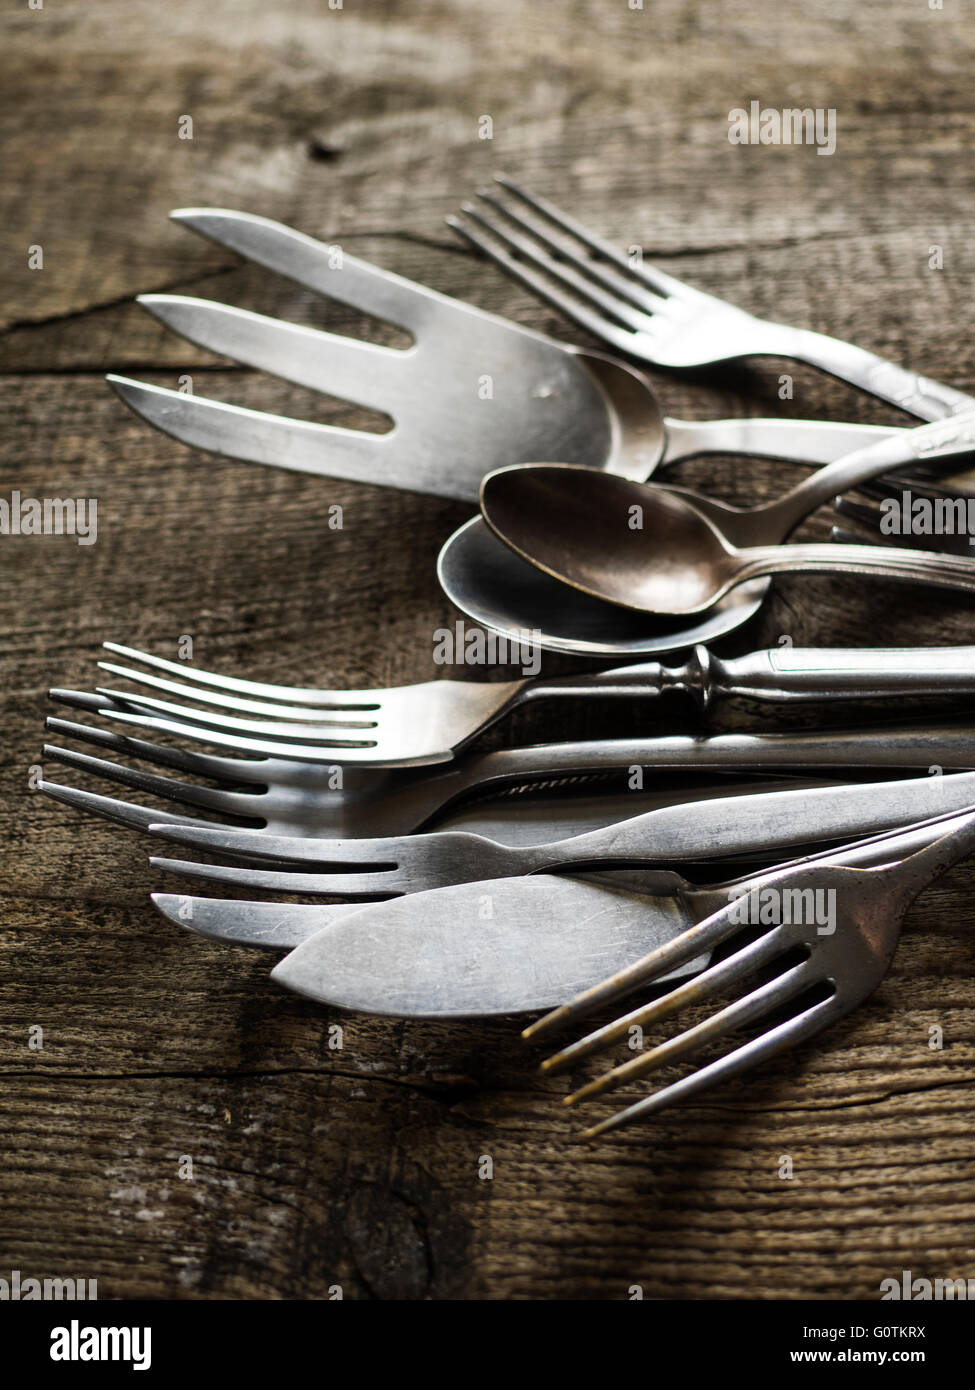 Stack of old vintage cutlery on wooden table Stock Photo